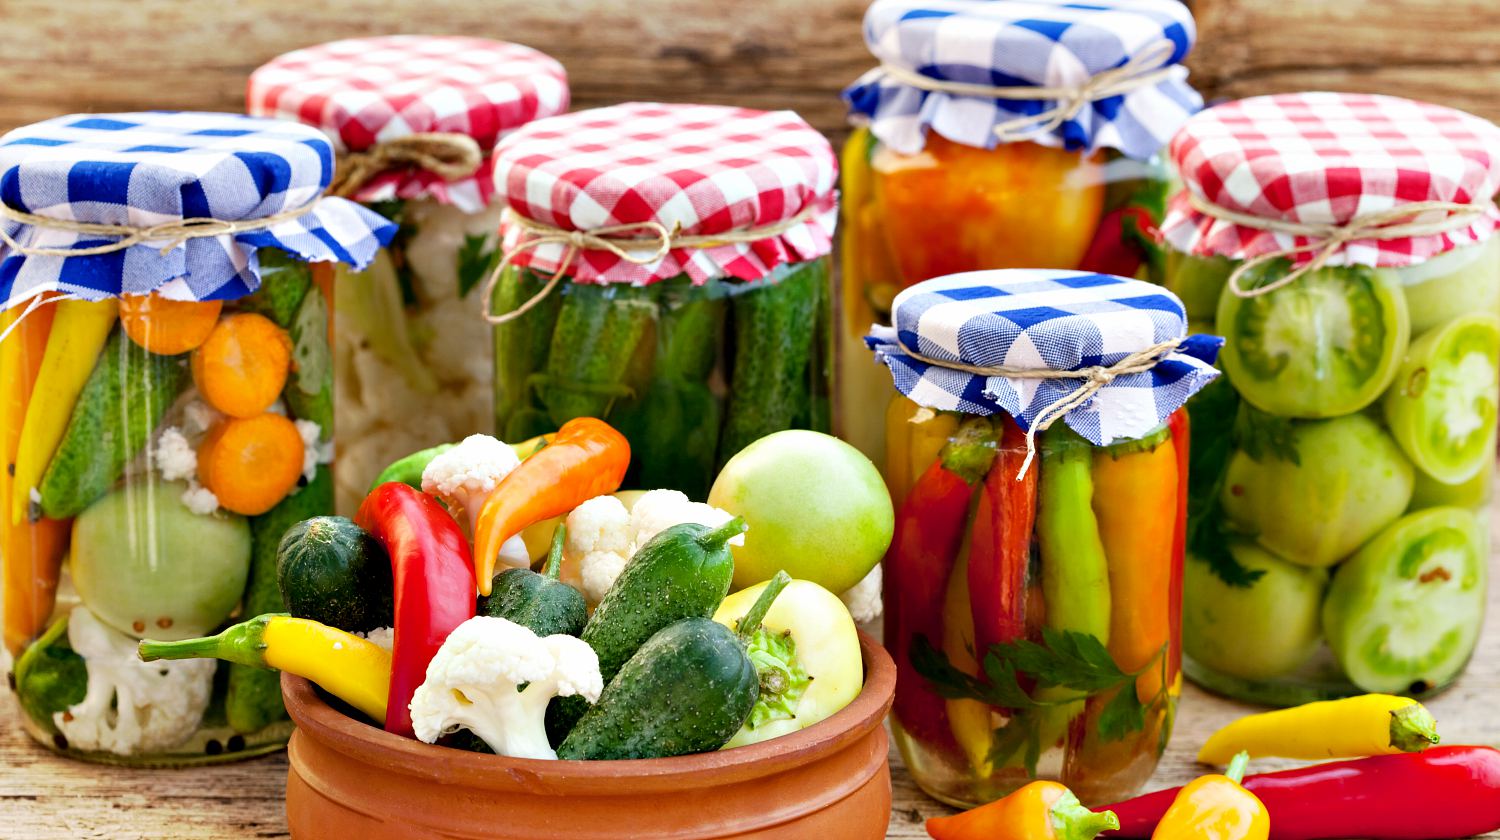 Jars with pickles, green tomatoes, cayenne pepper, mixed salad and chillies | Canning Tips To Make Food Last For A Long Time | Featured